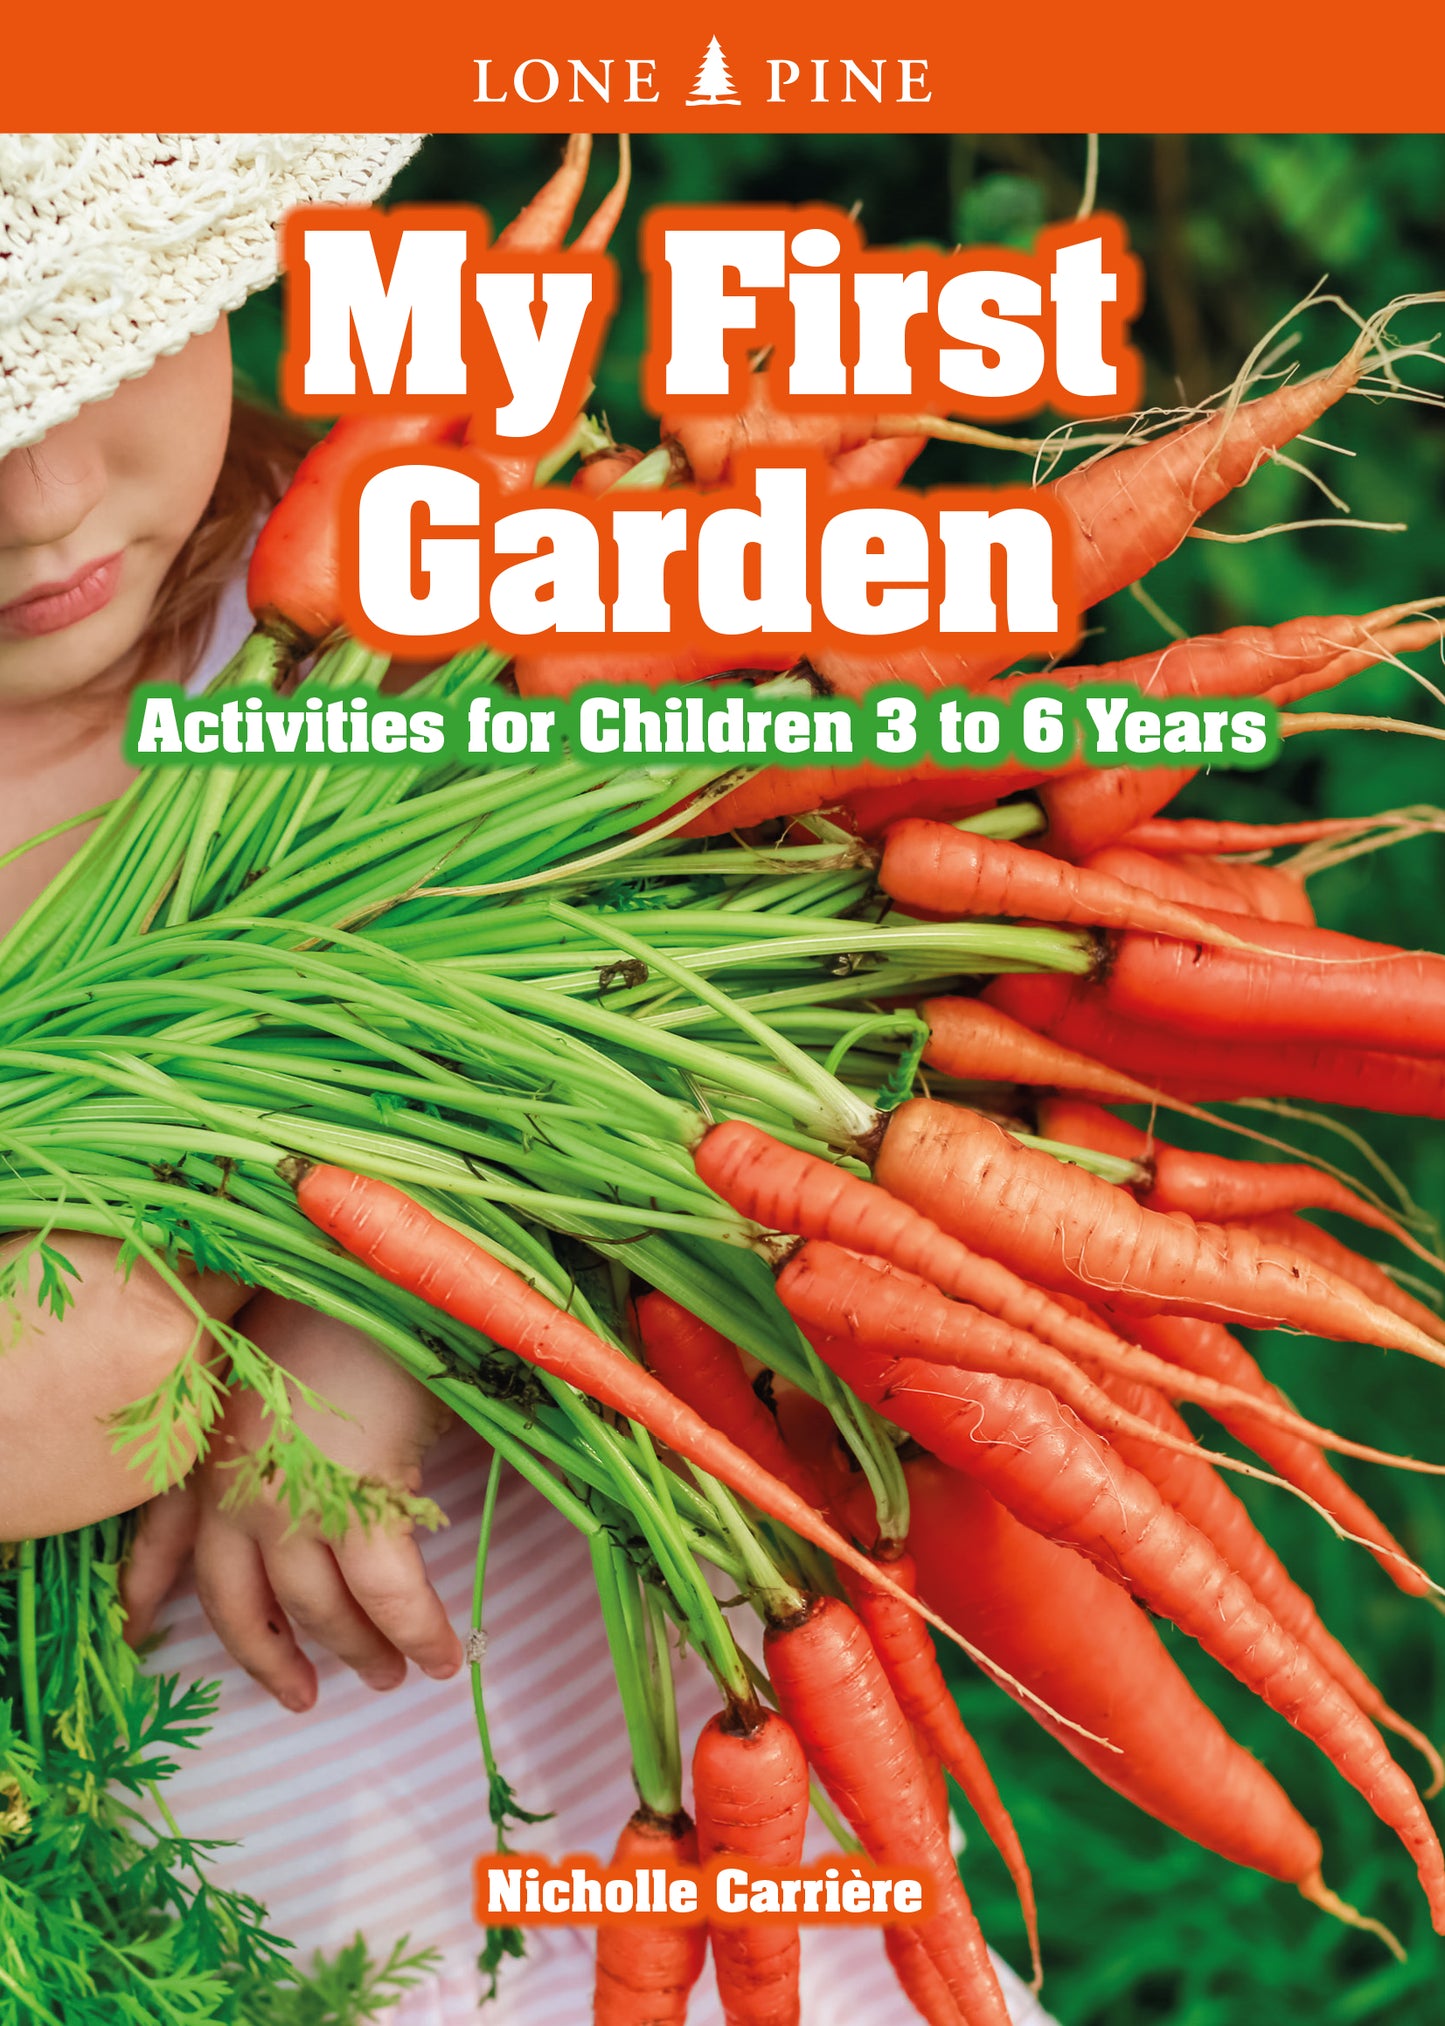 My First Garden - Activities for Children 3 to 6 Years by Nicholle Carrière